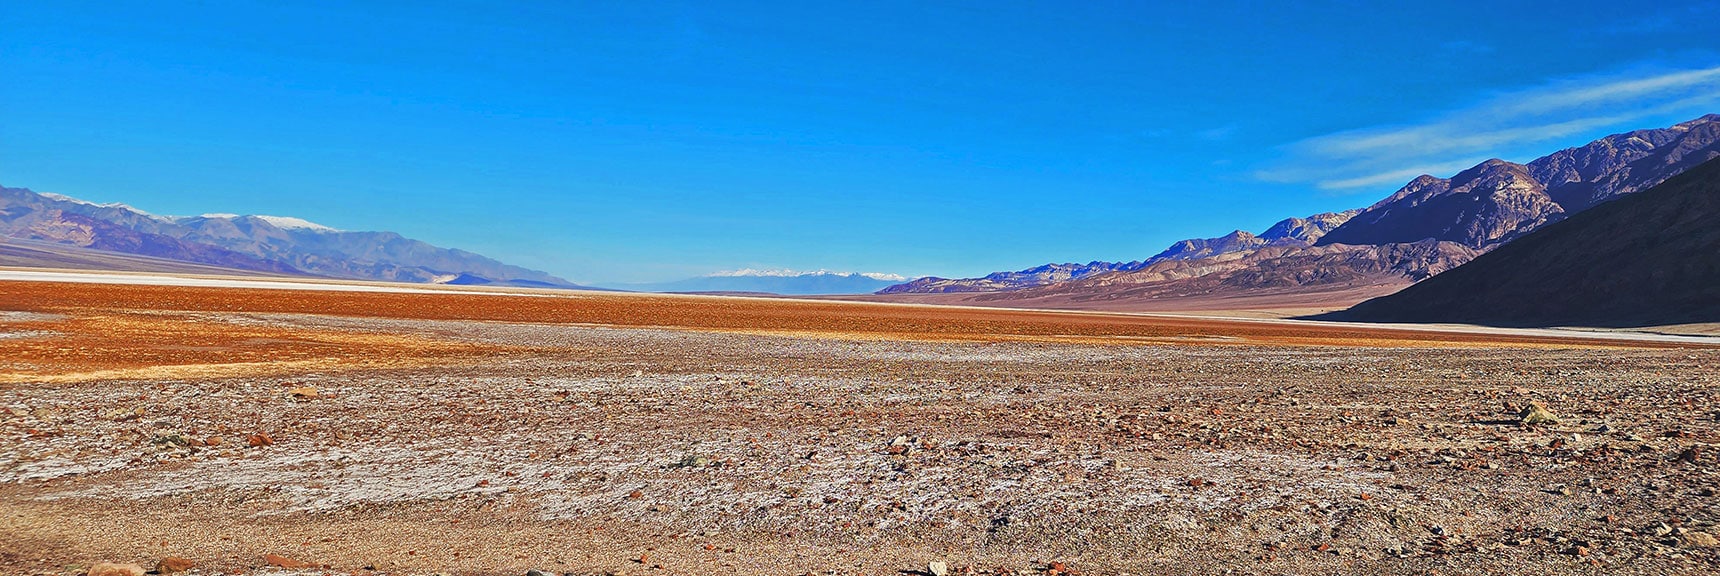 Death Valley View North from Badwater Road | Death Valley Crossing | Death Valley National Park, California | David Smith | LasVegasAreaTrails.com